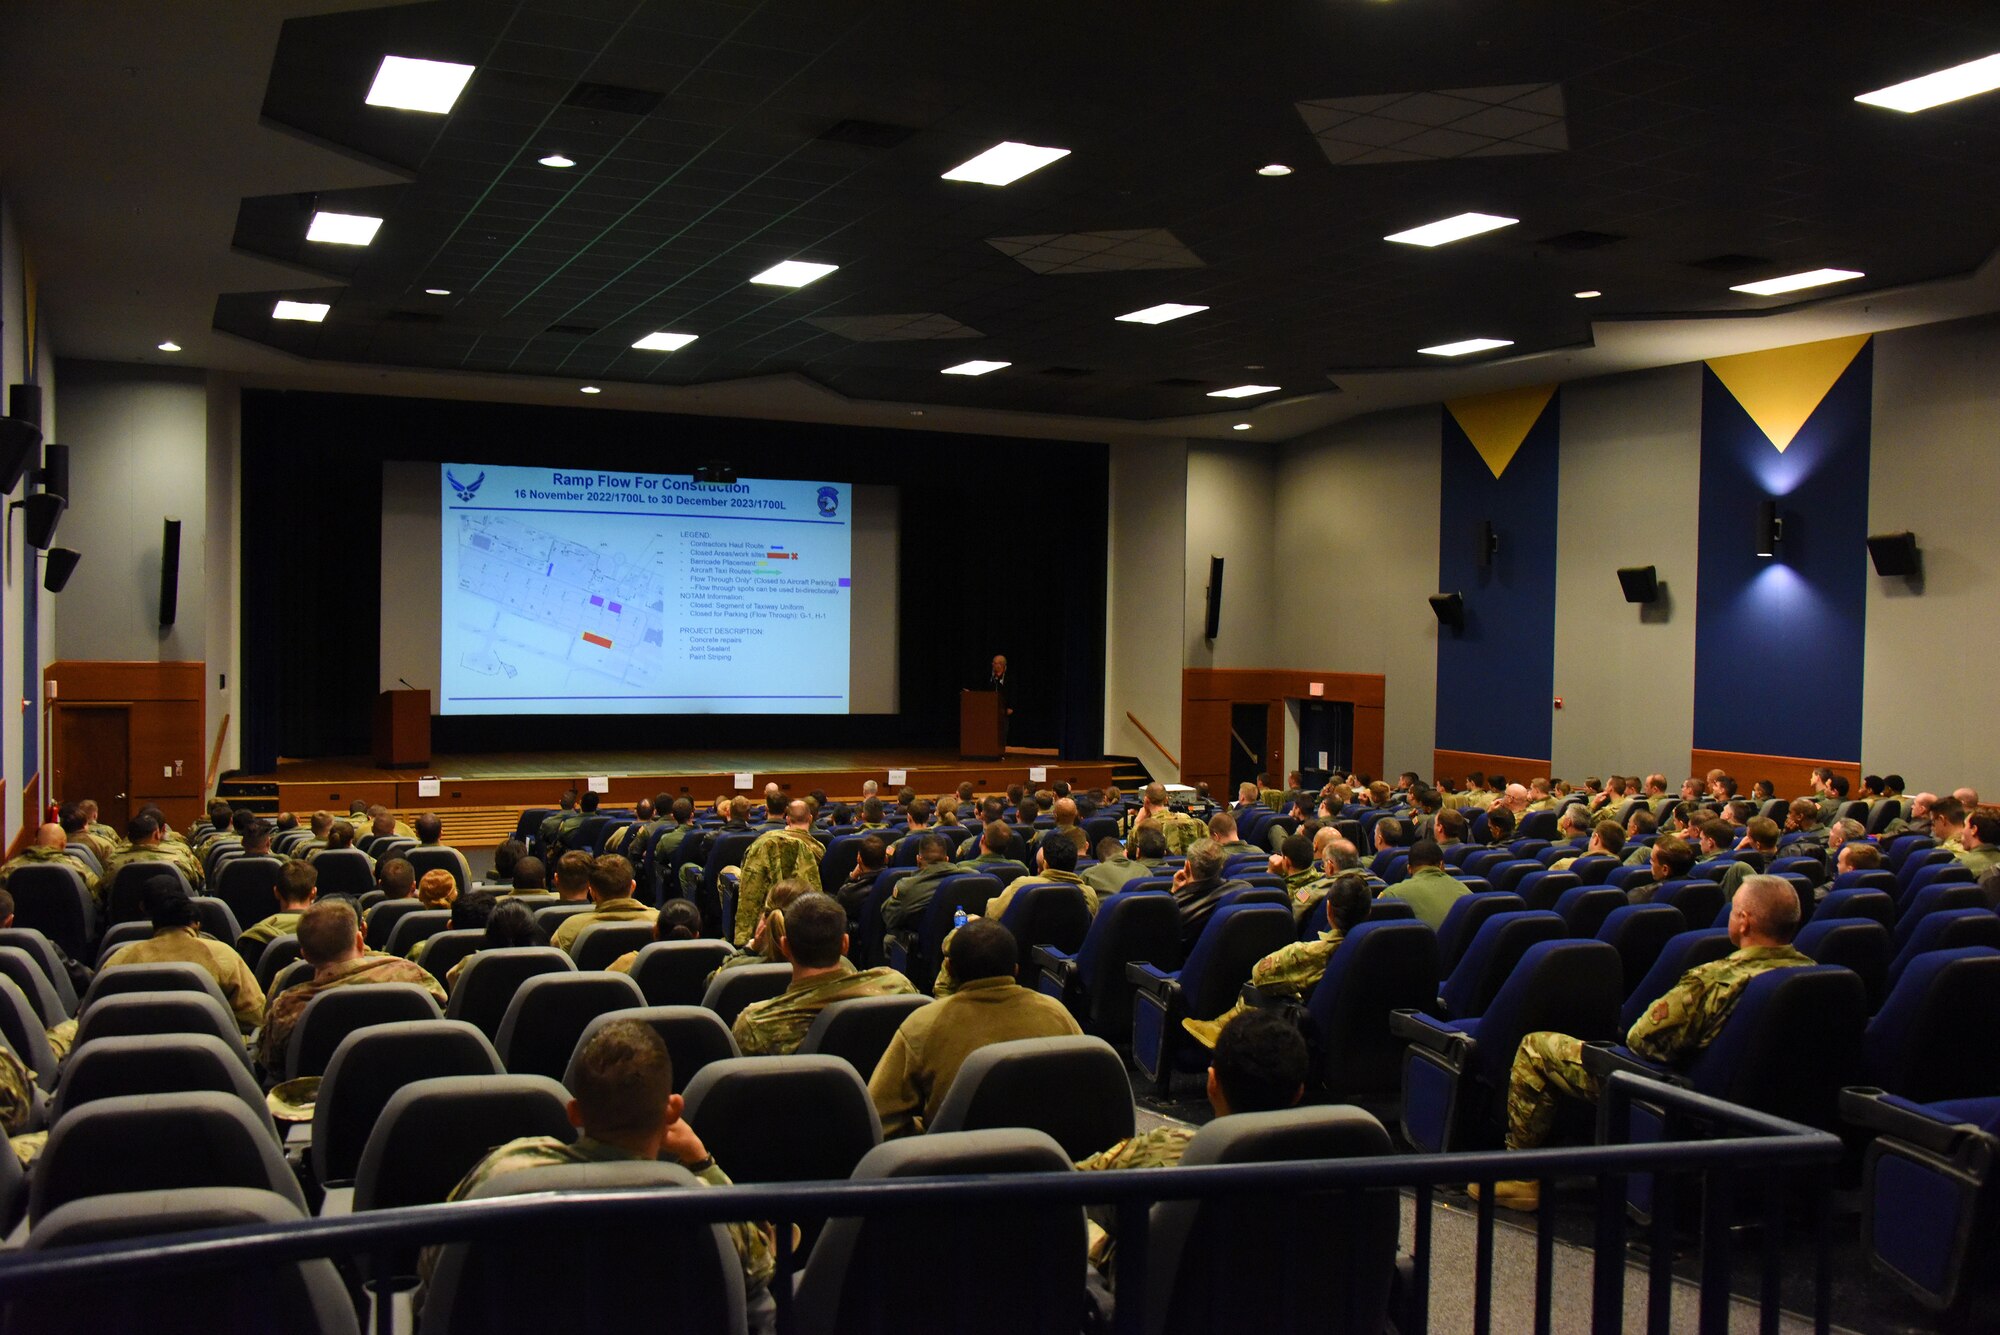 Keith Taylor, 305th Operations Support Squadron McGuire airfield manager, speaks to Airmen at the symposium.